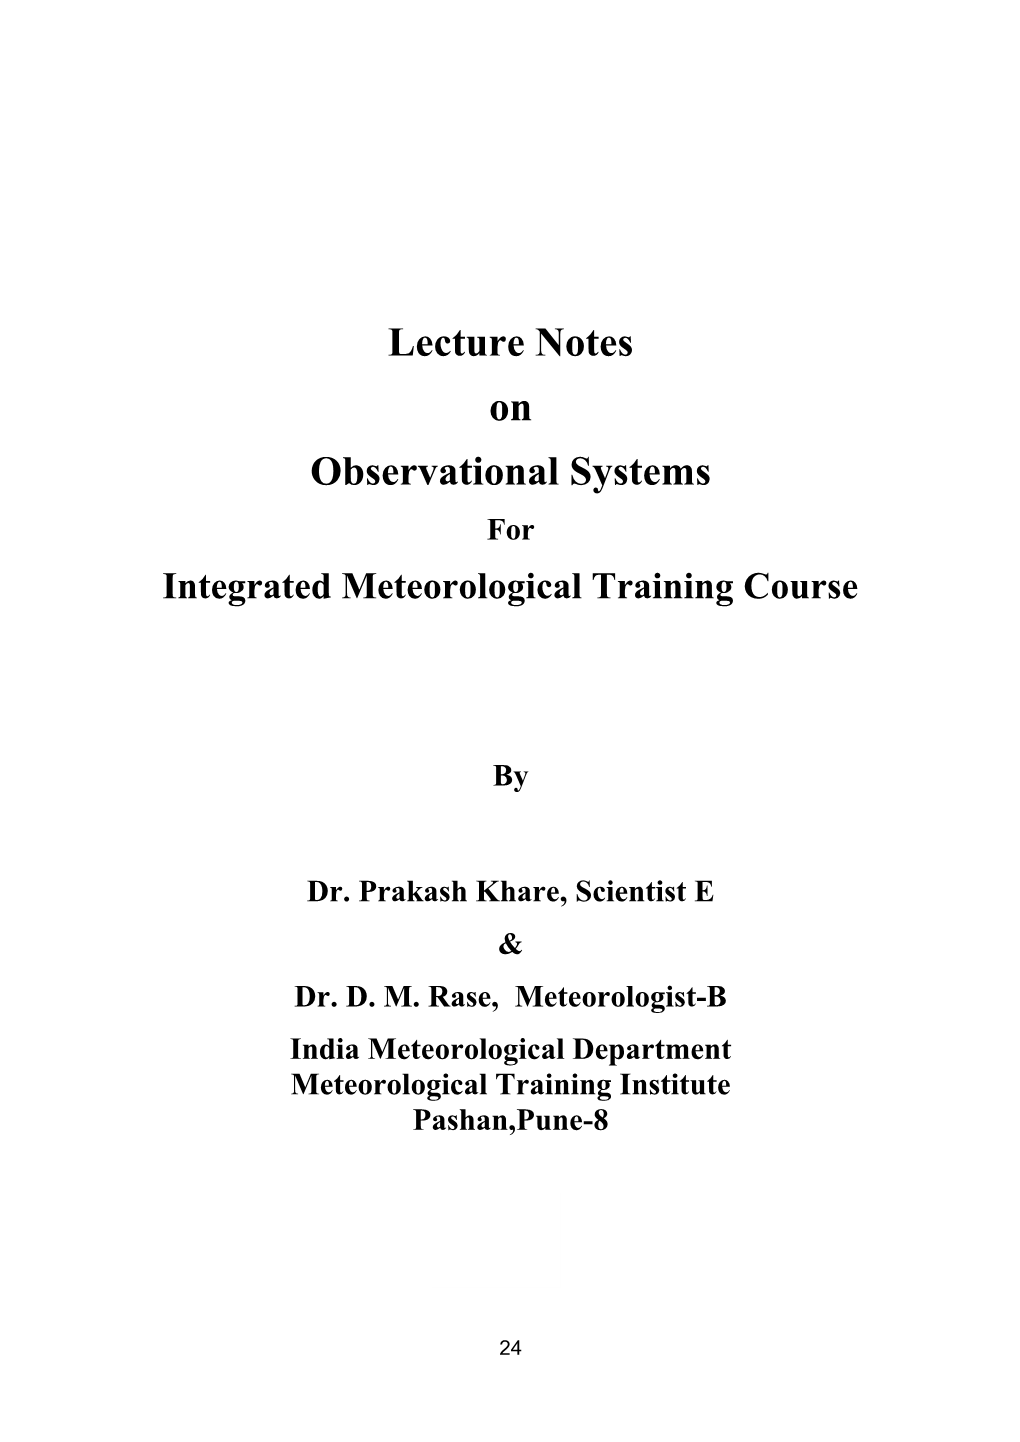 Observational Systems for Integrated Meteorological Training Course